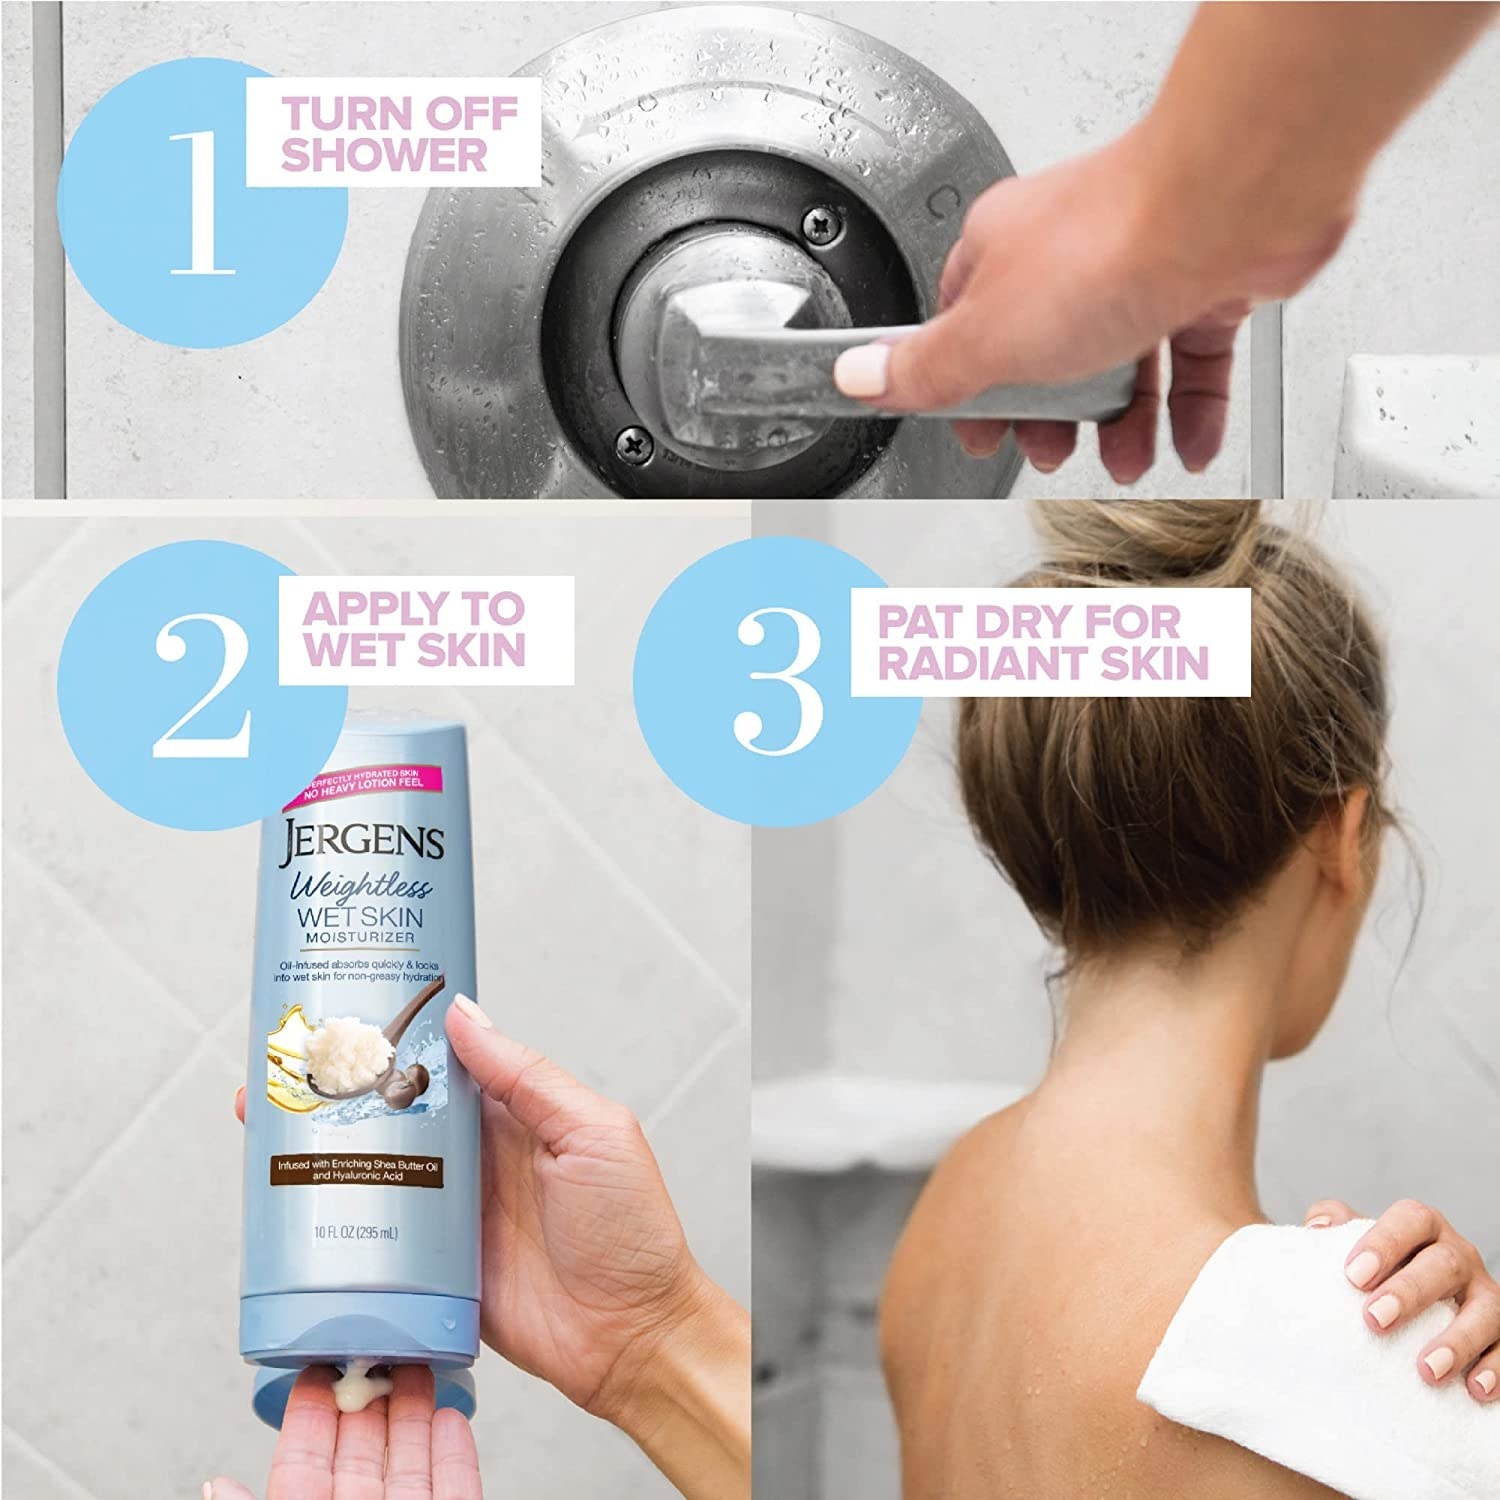 step-by-step image of someone turning off the shower, then applying the product to wet skin, and then patting skin dry